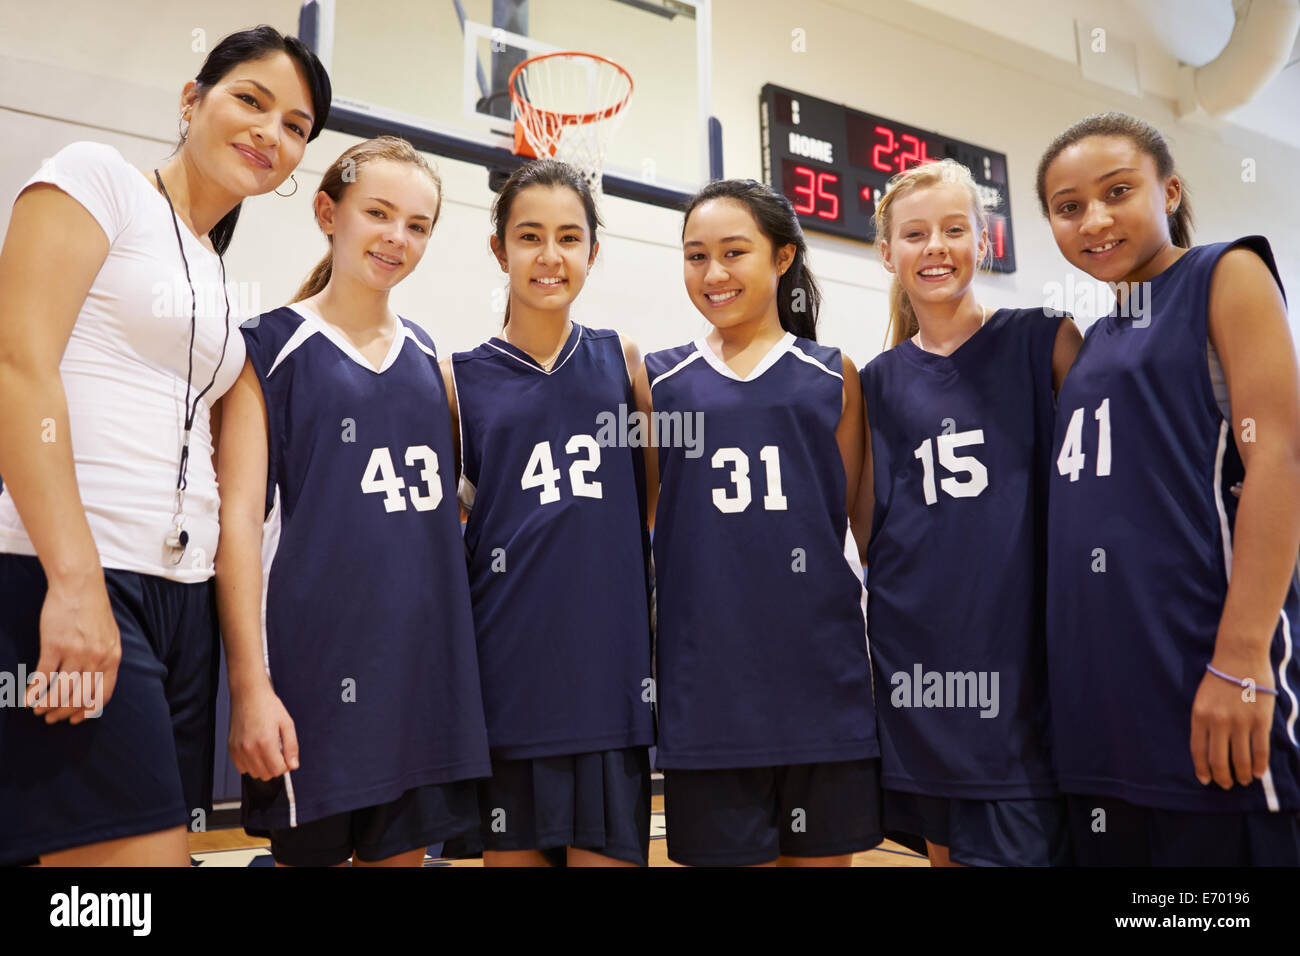 Members Of Female High School Basketball Team With Coach Stock Photo